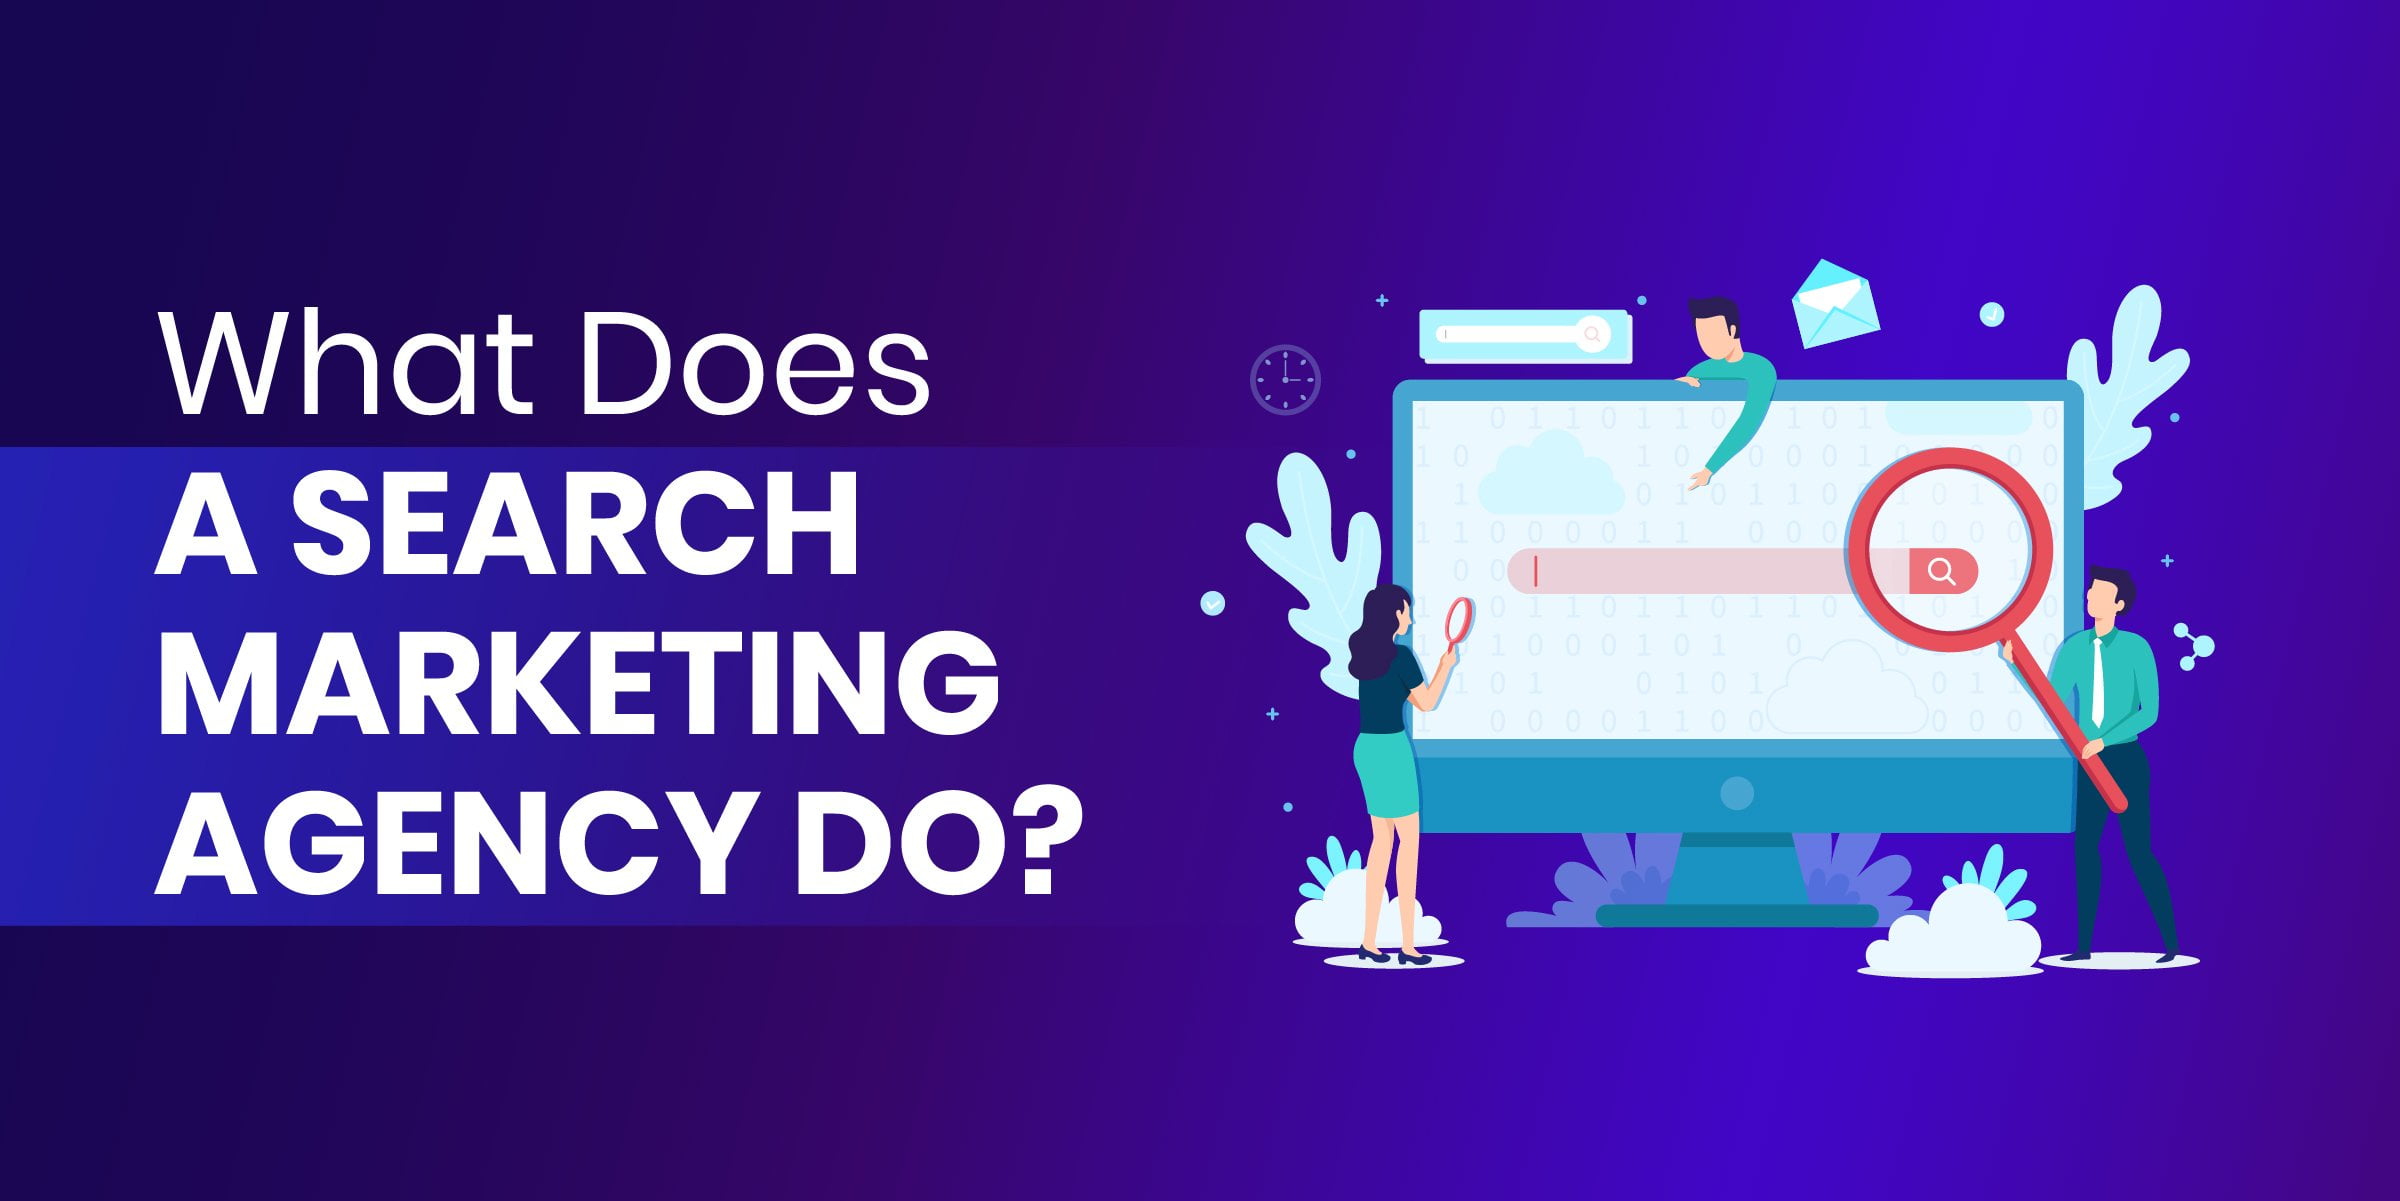 What Does Search Marketing Do